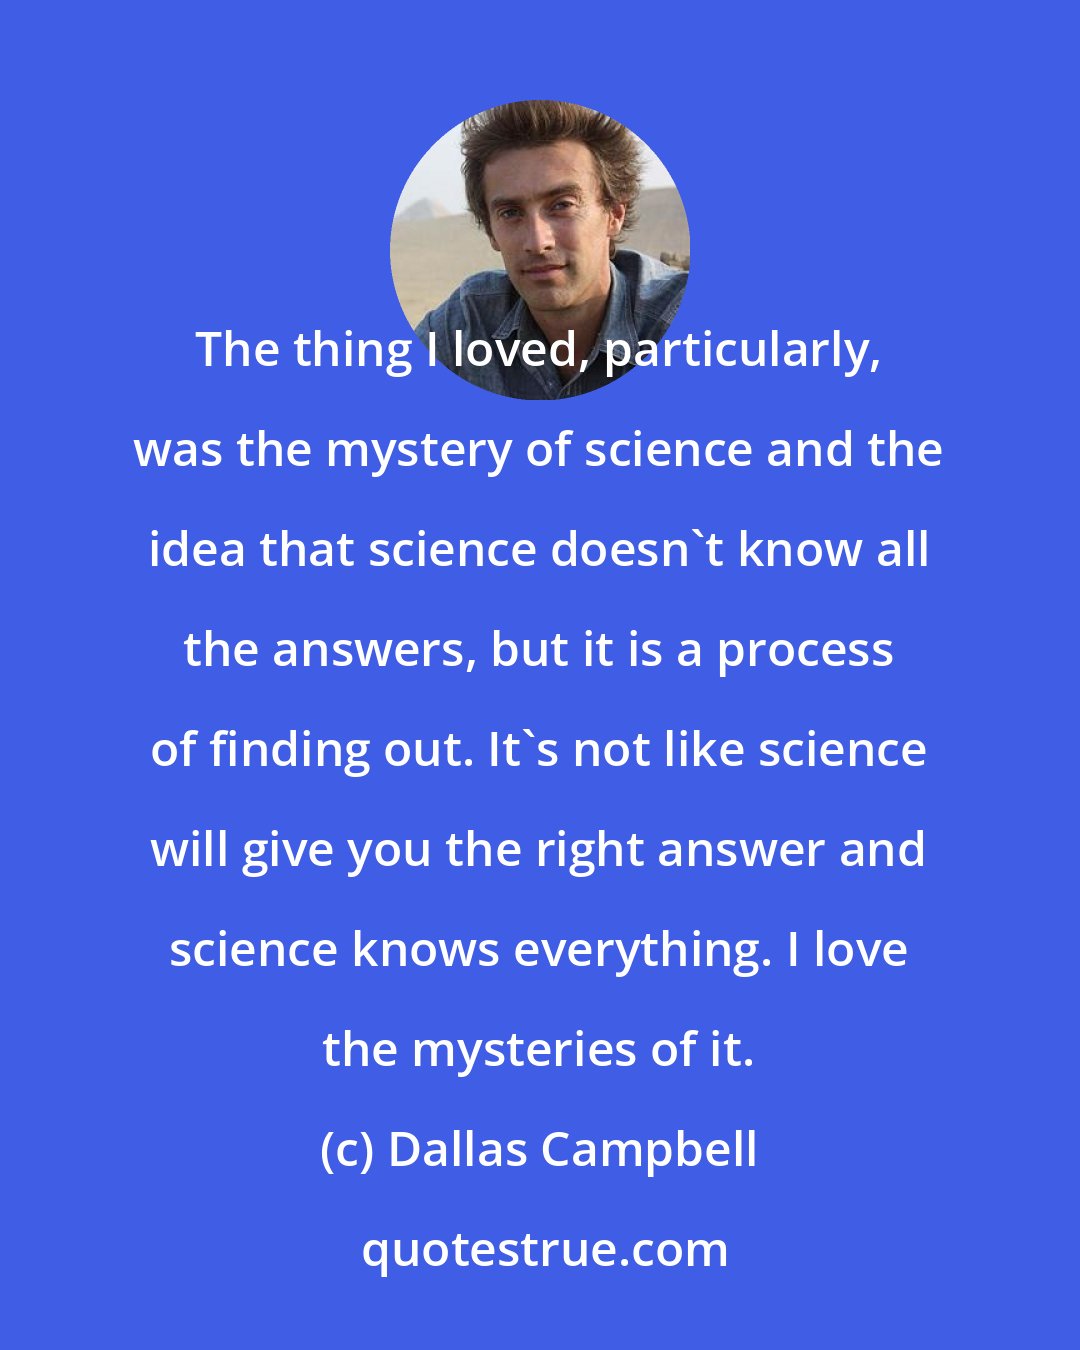 Dallas Campbell: The thing I loved, particularly, was the mystery of science and the idea that science doesn't know all the answers, but it is a process of finding out. It's not like science will give you the right answer and science knows everything. I love the mysteries of it.